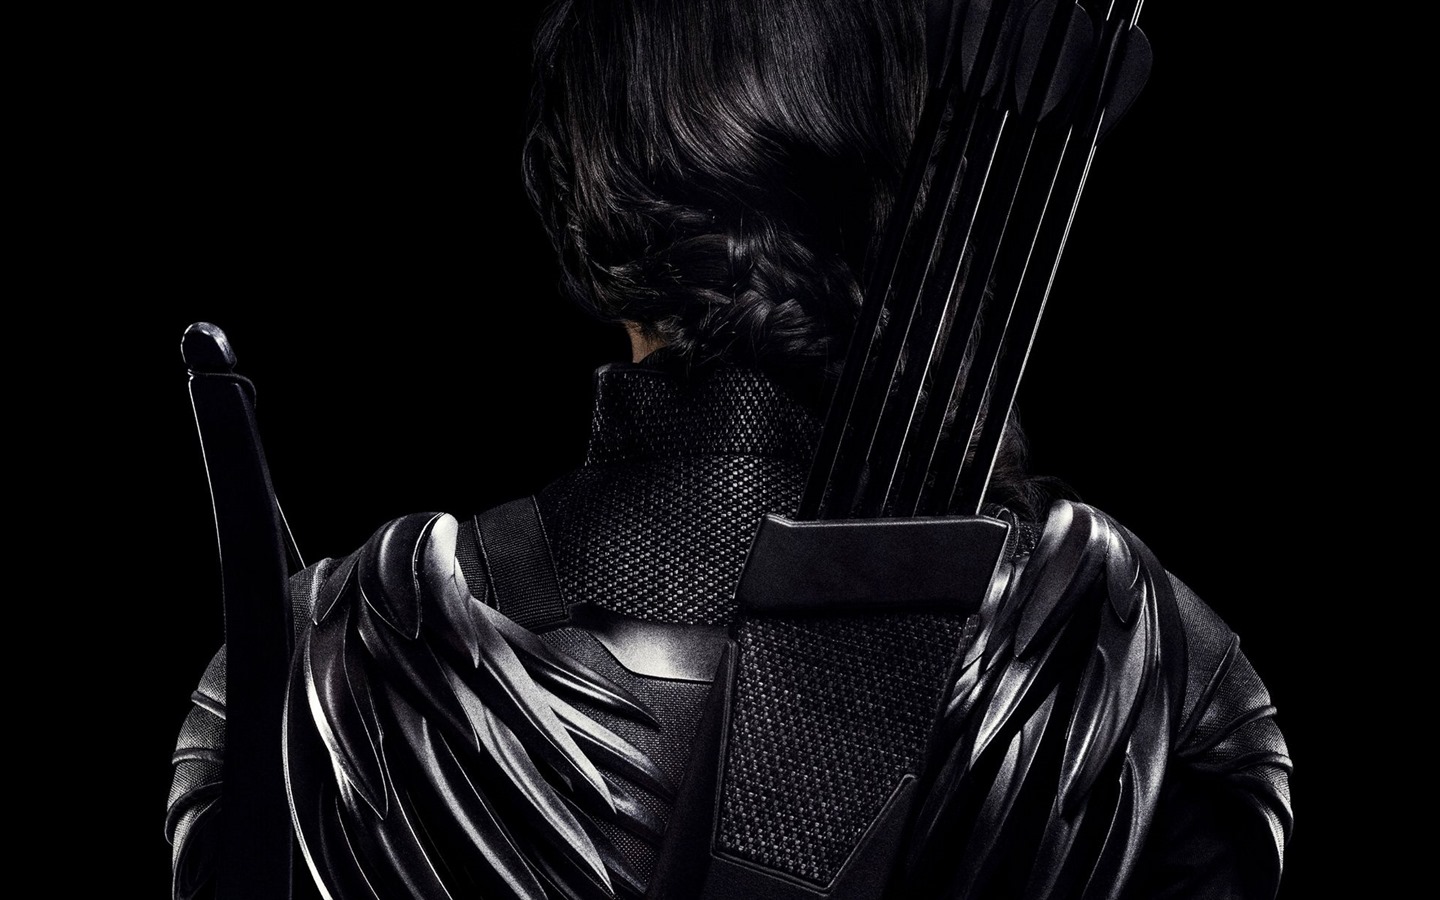 The Hunger Games: Mockingjay HD wallpapers #6 - 1440x900